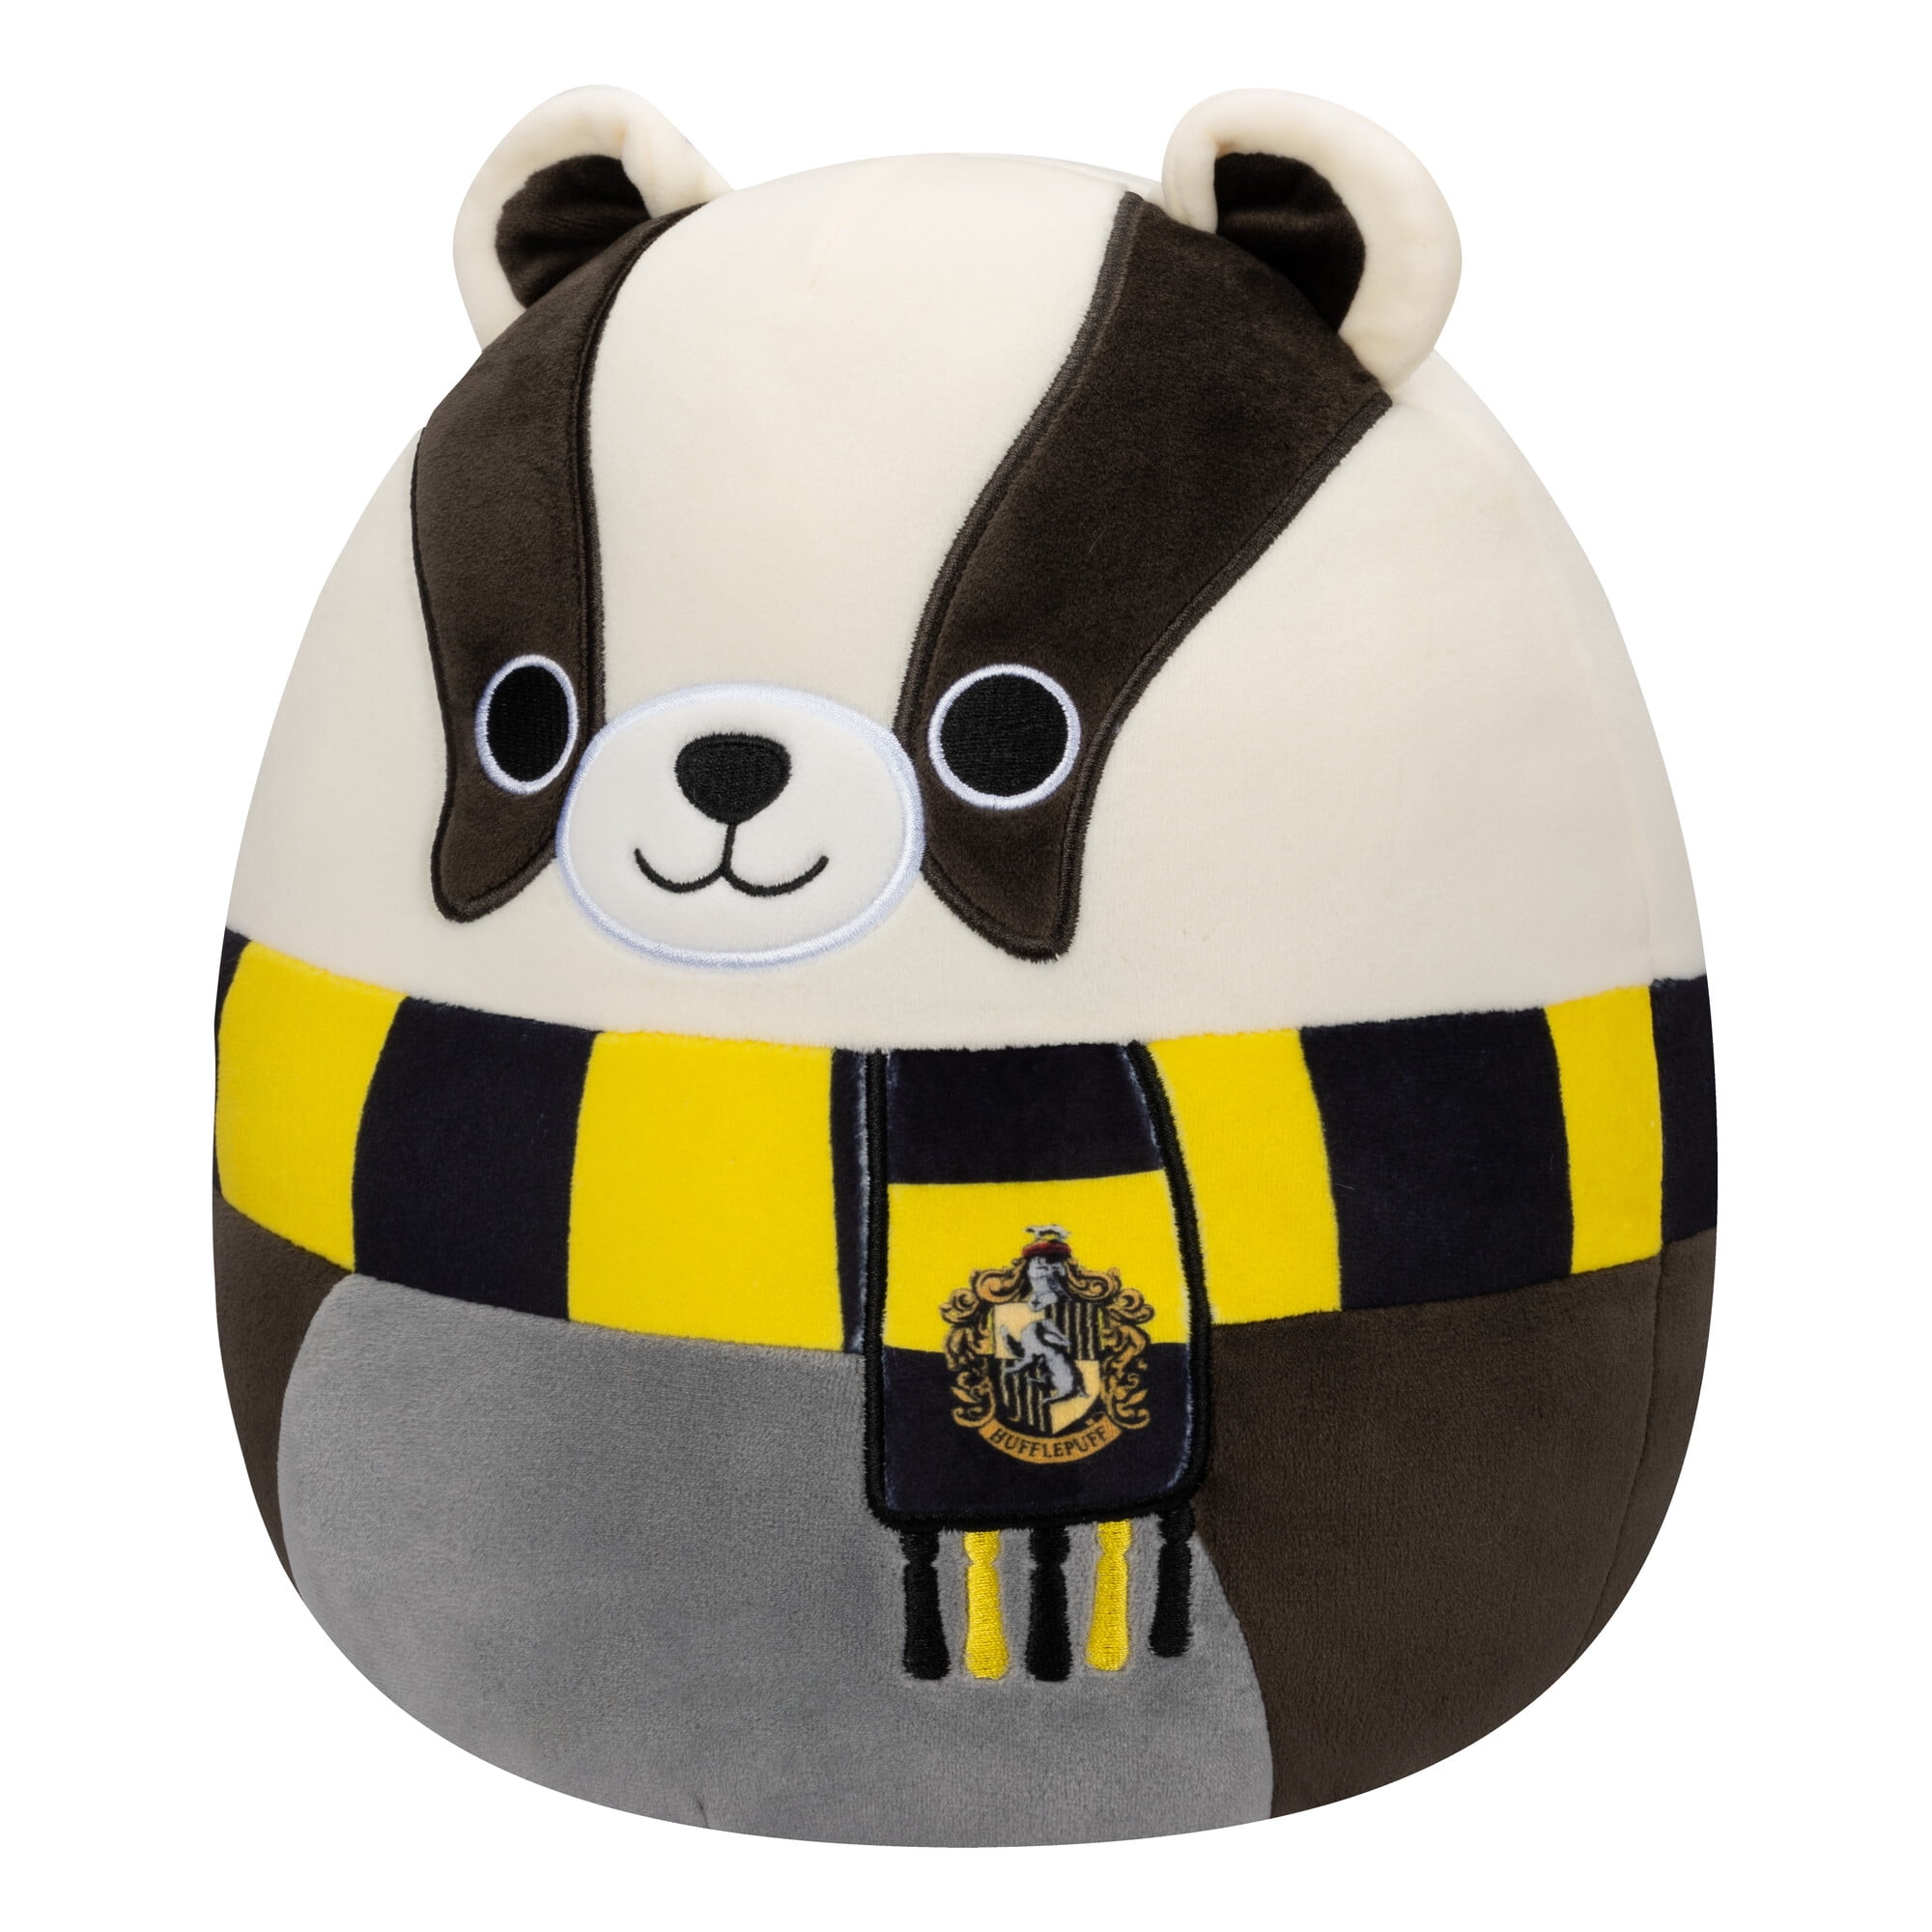 Squishmallows Harry Potter 10-inch Hufflepuff Badger Plush Ultra Soft  Official Jazwares Plush